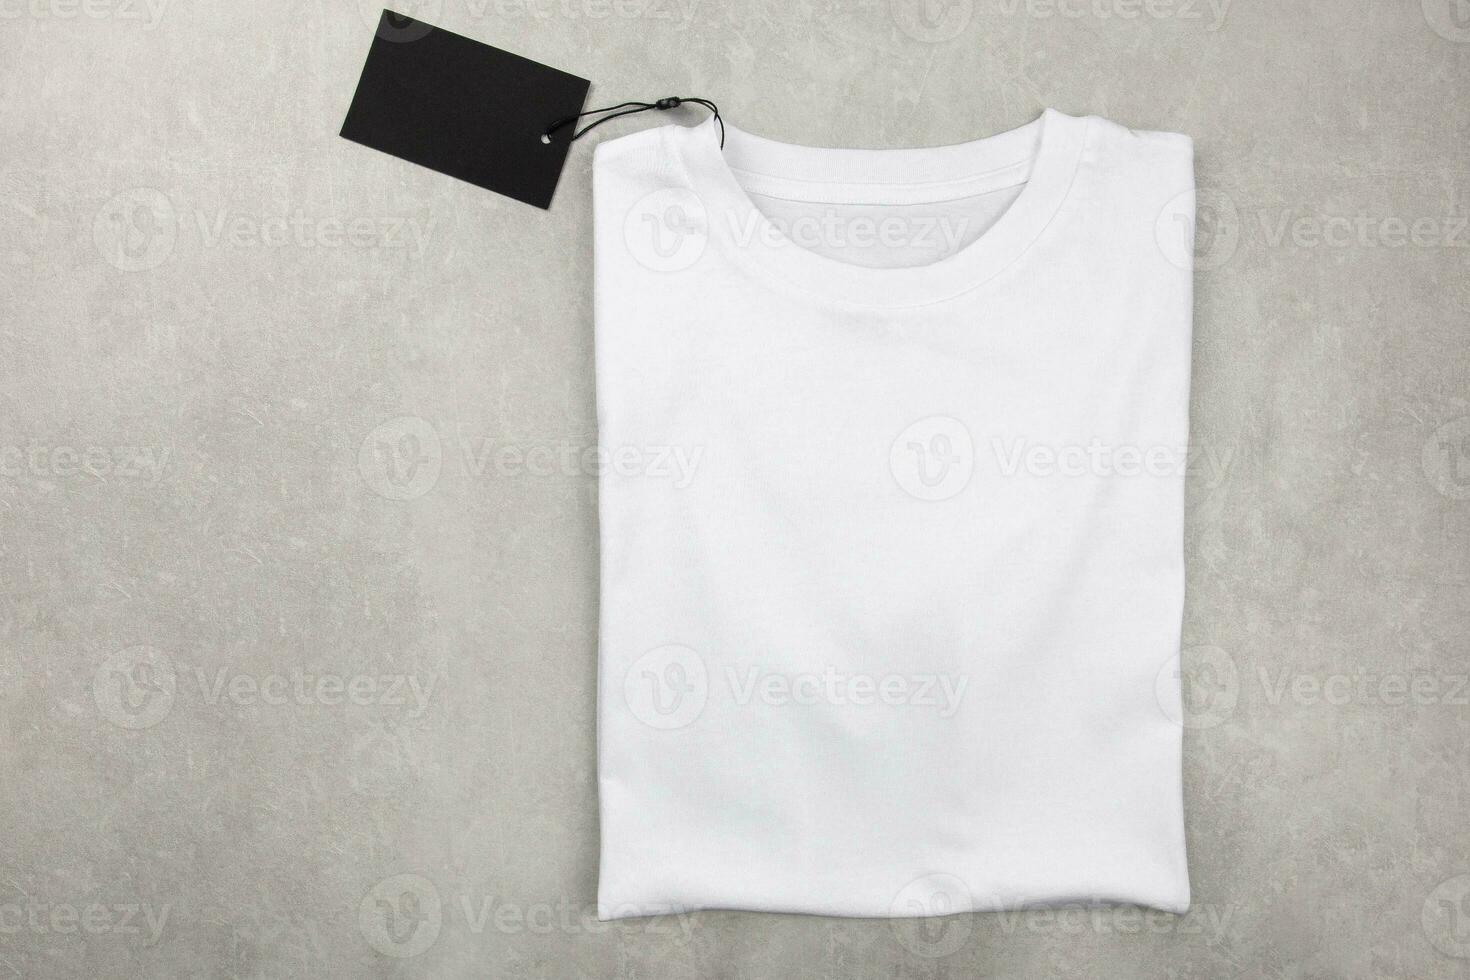 White womens cotton Tshirt mockup with label. Design t shirt template, print presentation mock up. Top view flat lay. Concrete stone background. photo